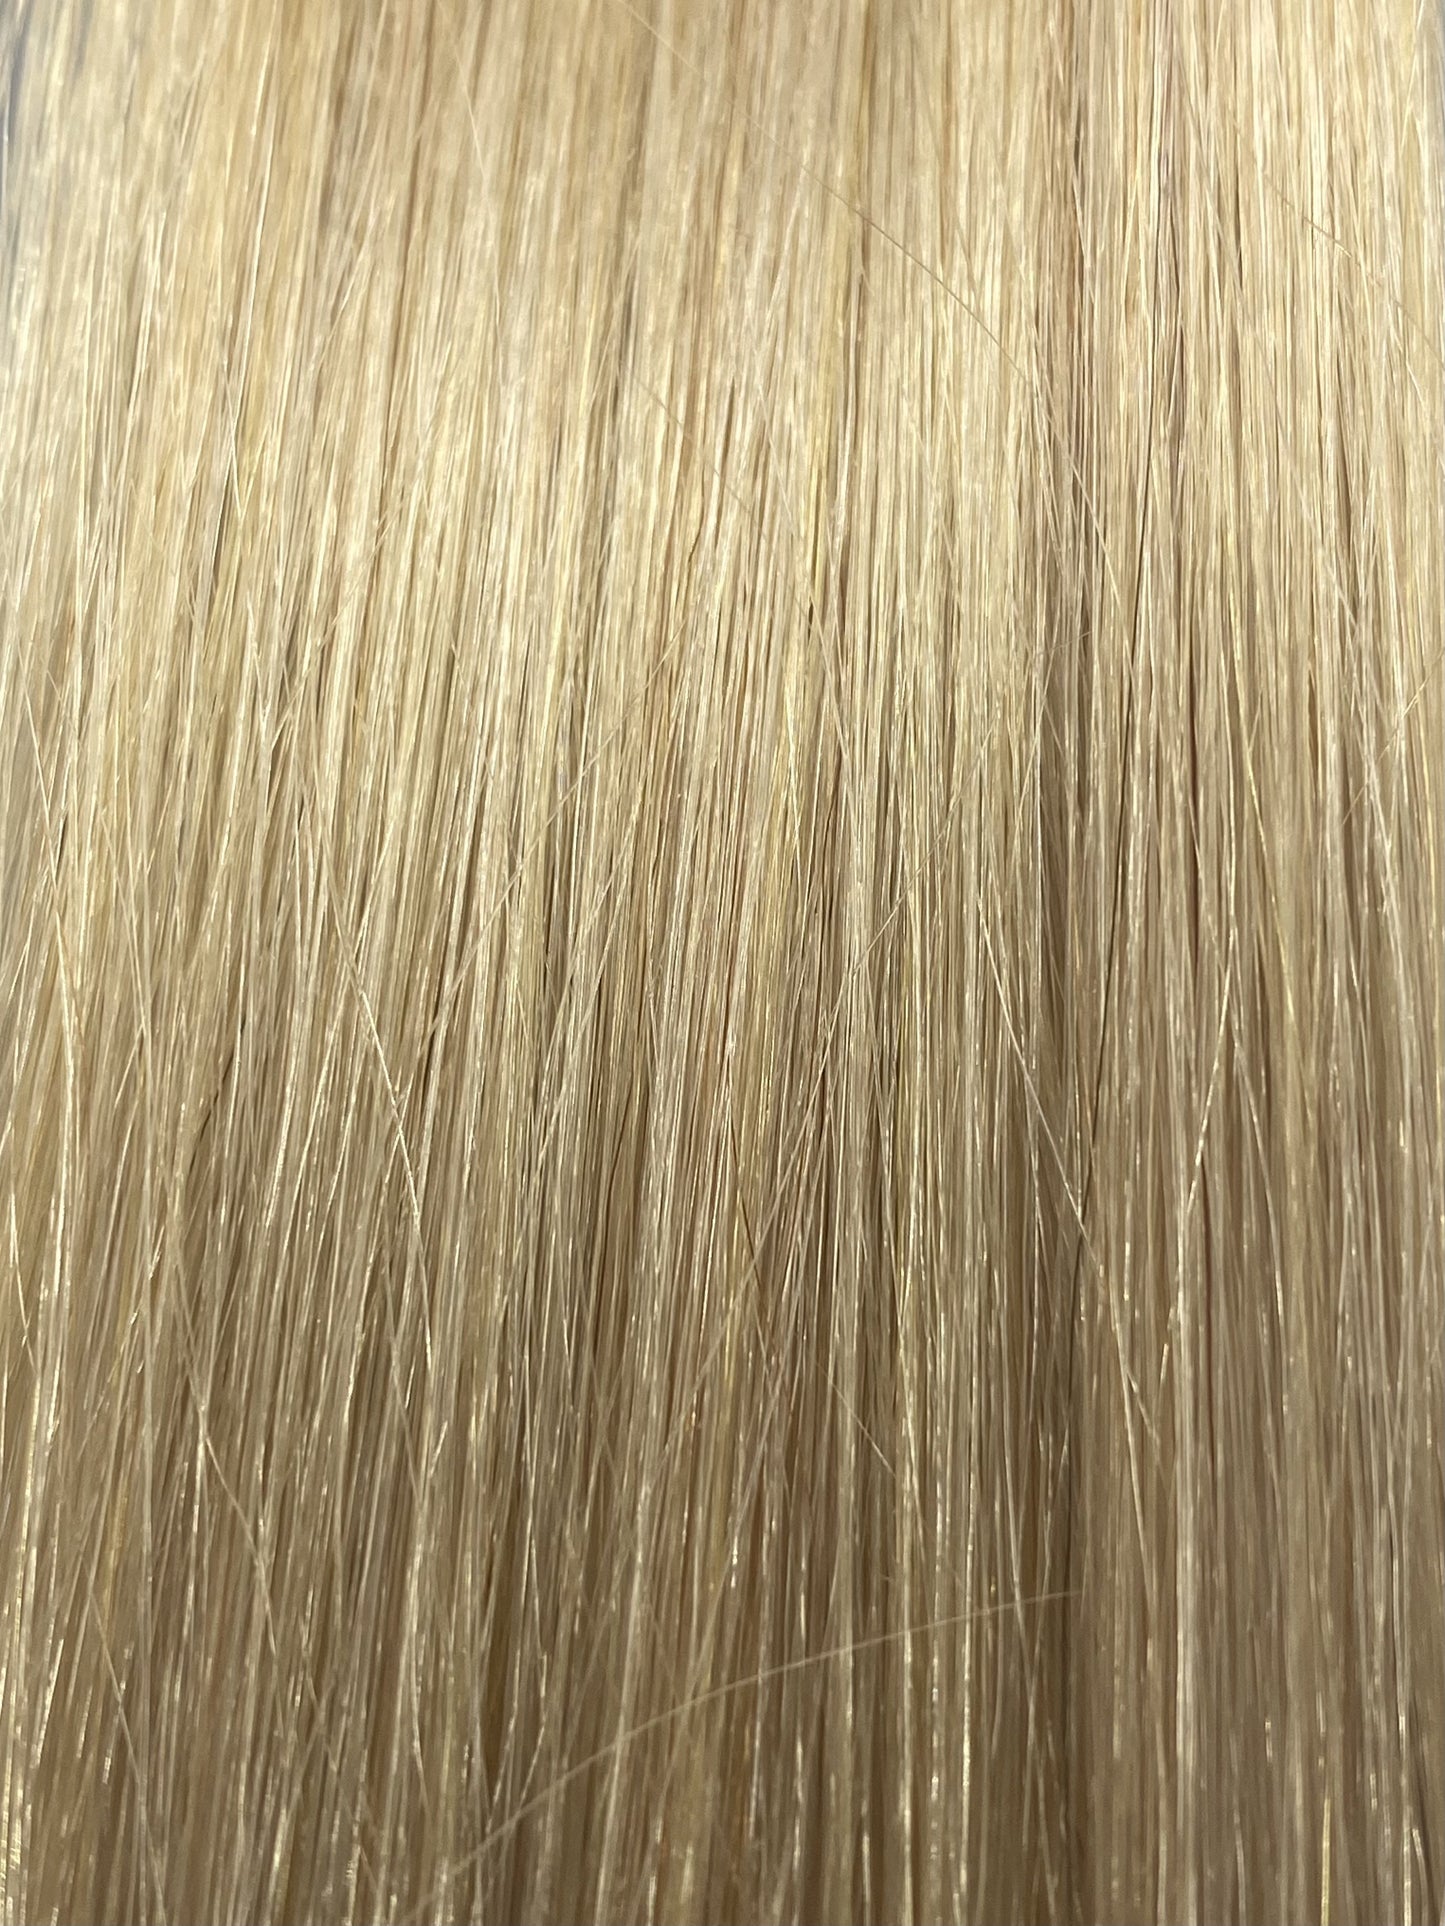 Fusion hair extensions #1002 - 40cm/16 inches - Very Light Ash Blonde Fusion Euro So Cap 